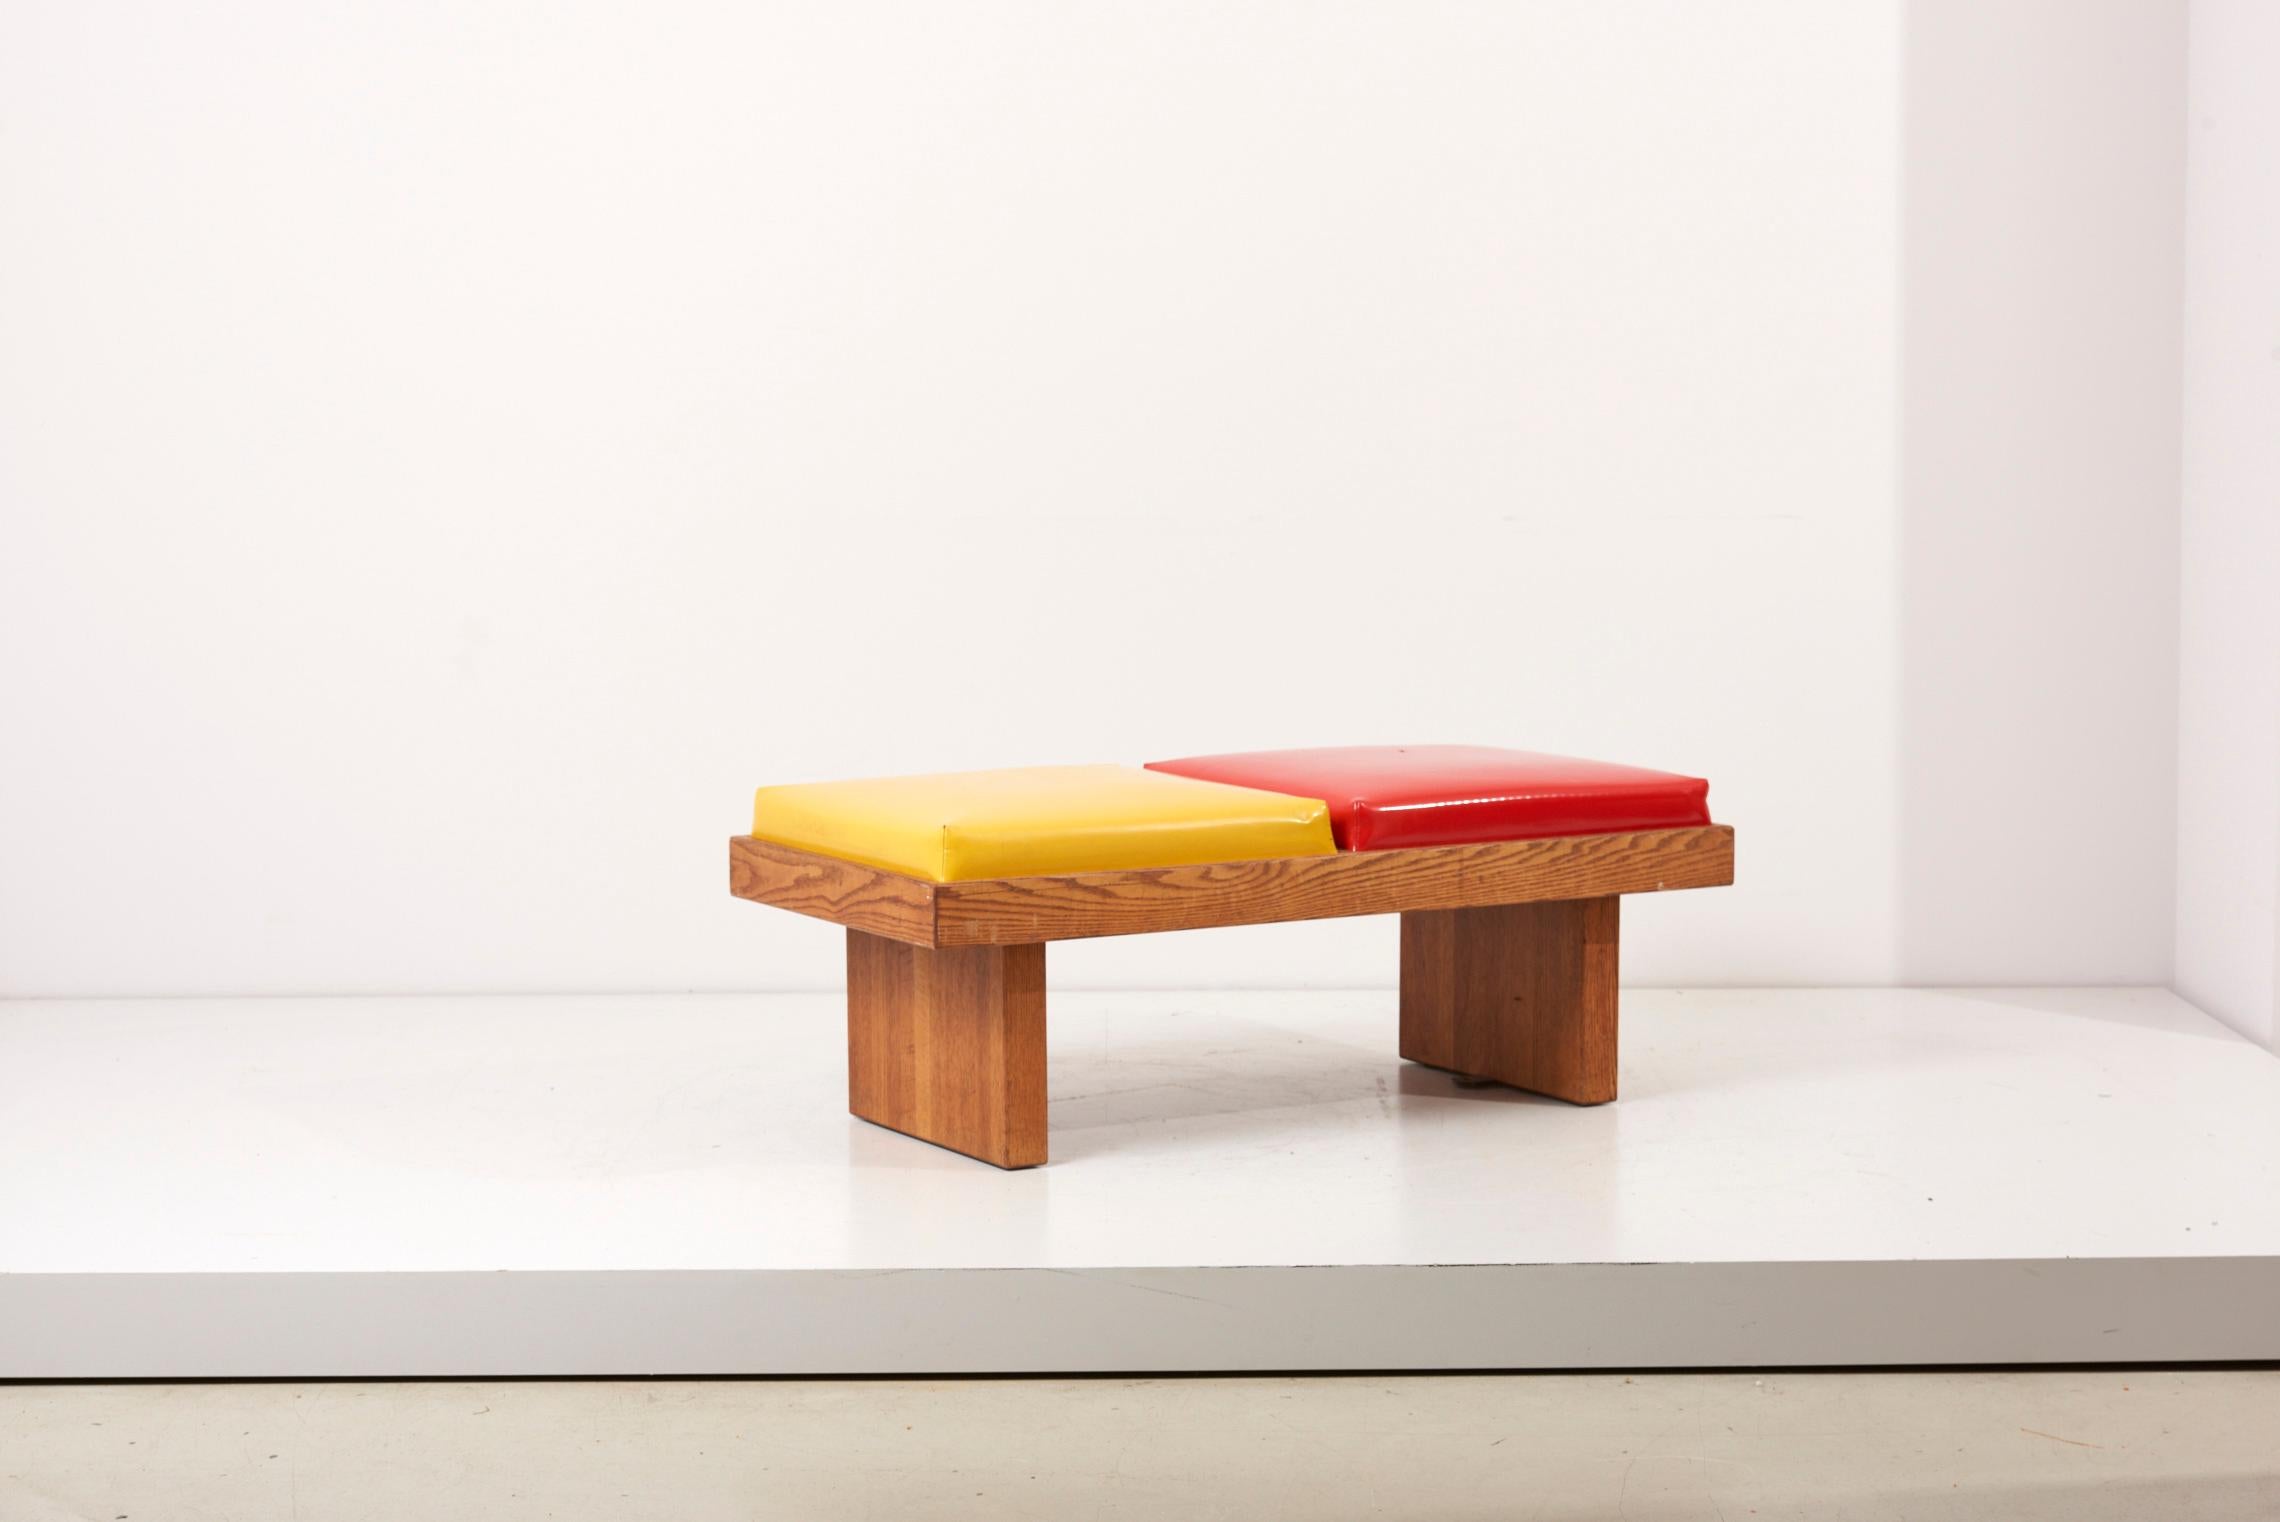 American Bench by Harvey Probber in Ketchup / Mustard in Oak, USA 1960s For Sale